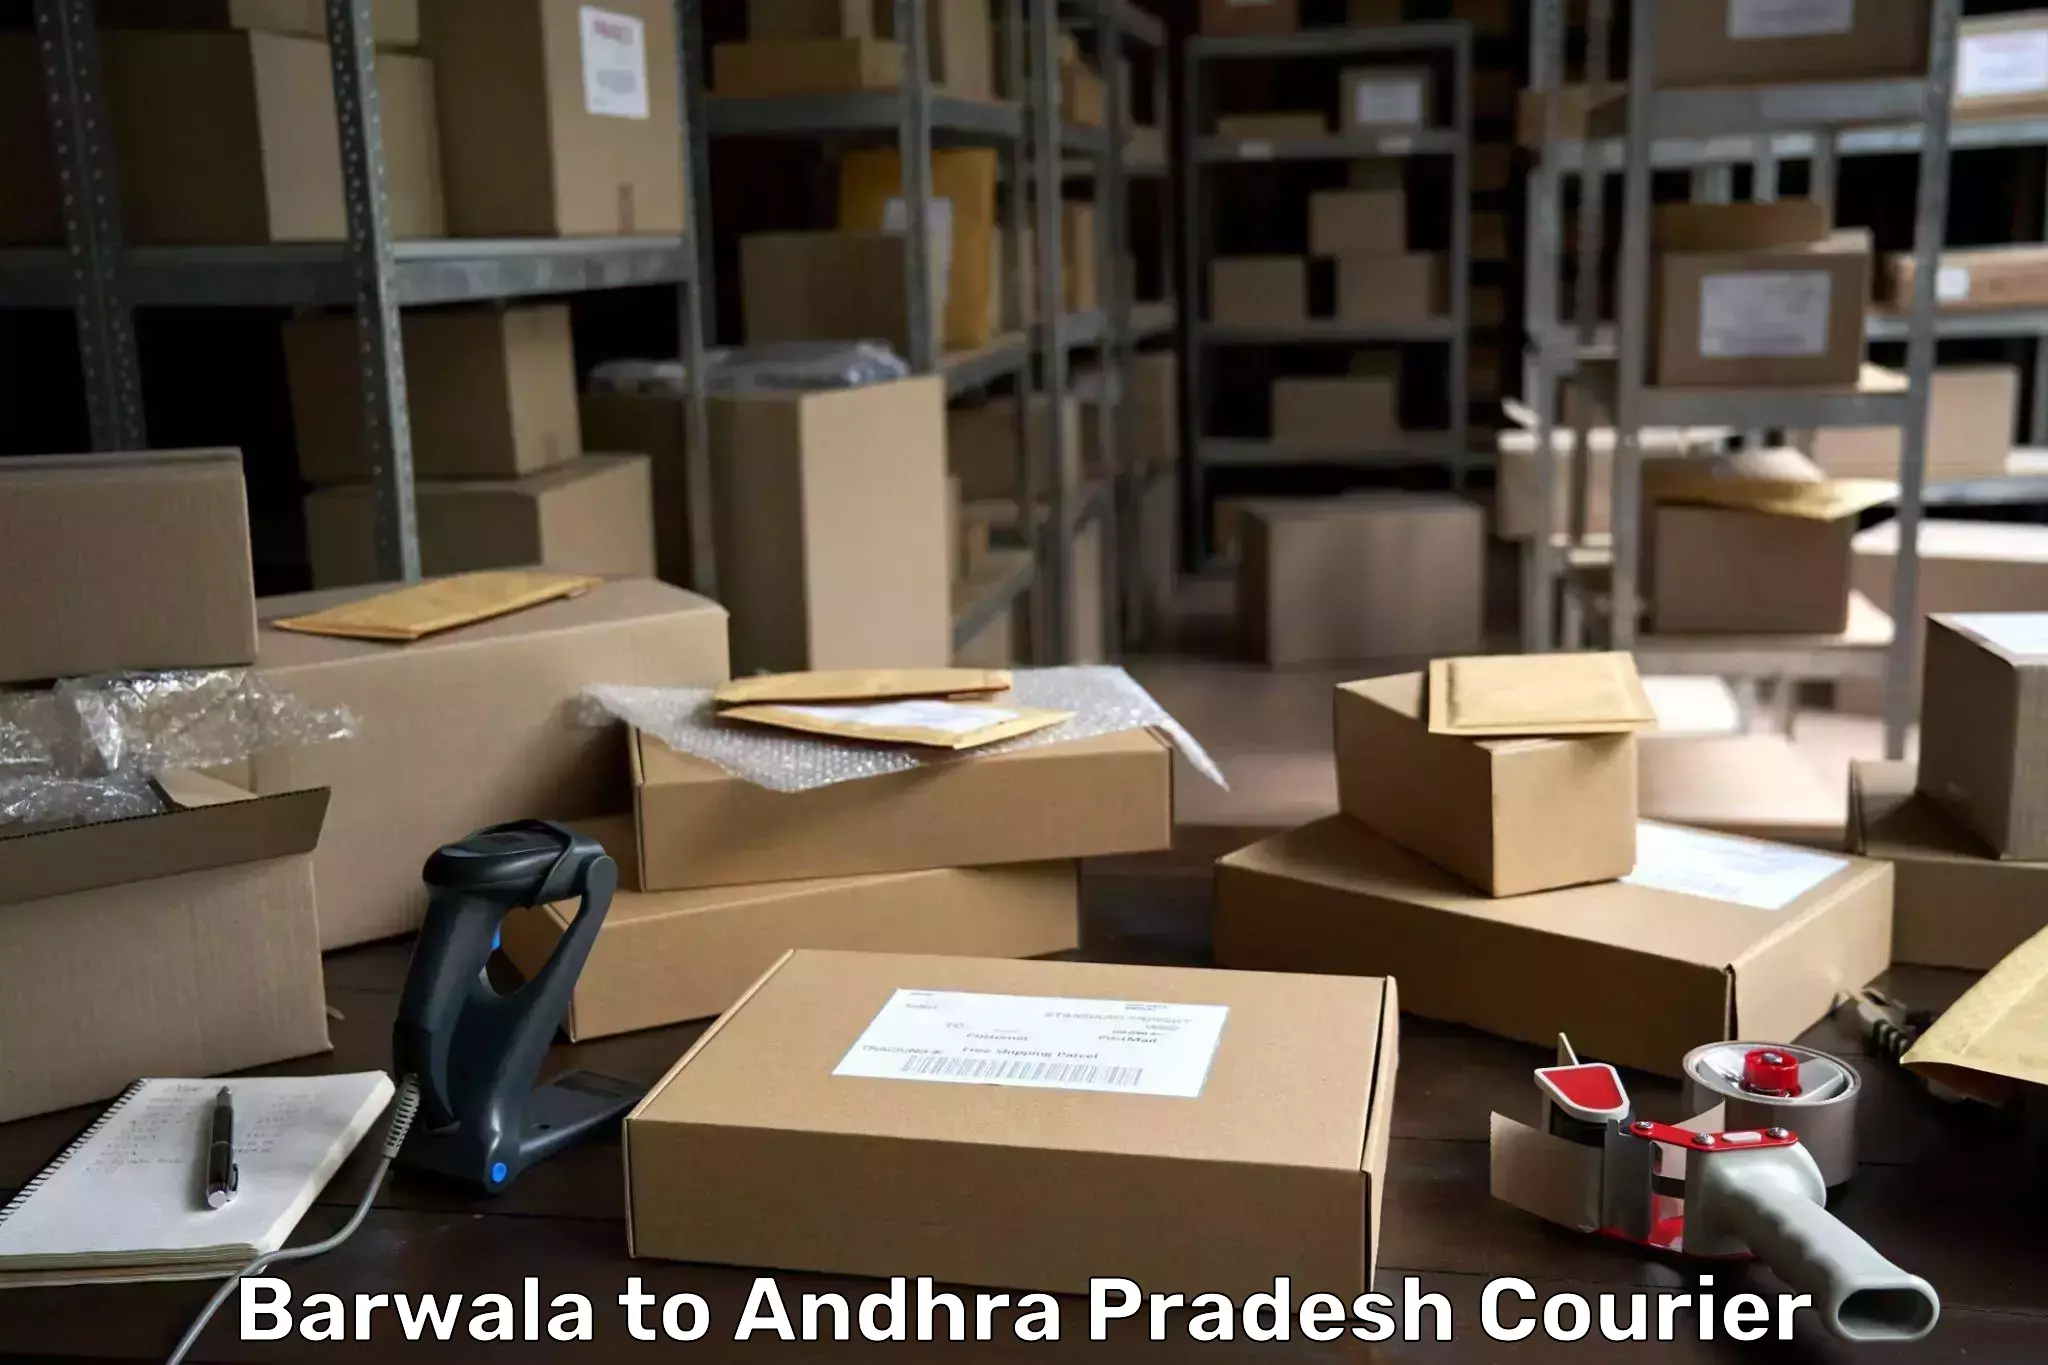 State-of-the-art courier technology Barwala to Andhra Pradesh